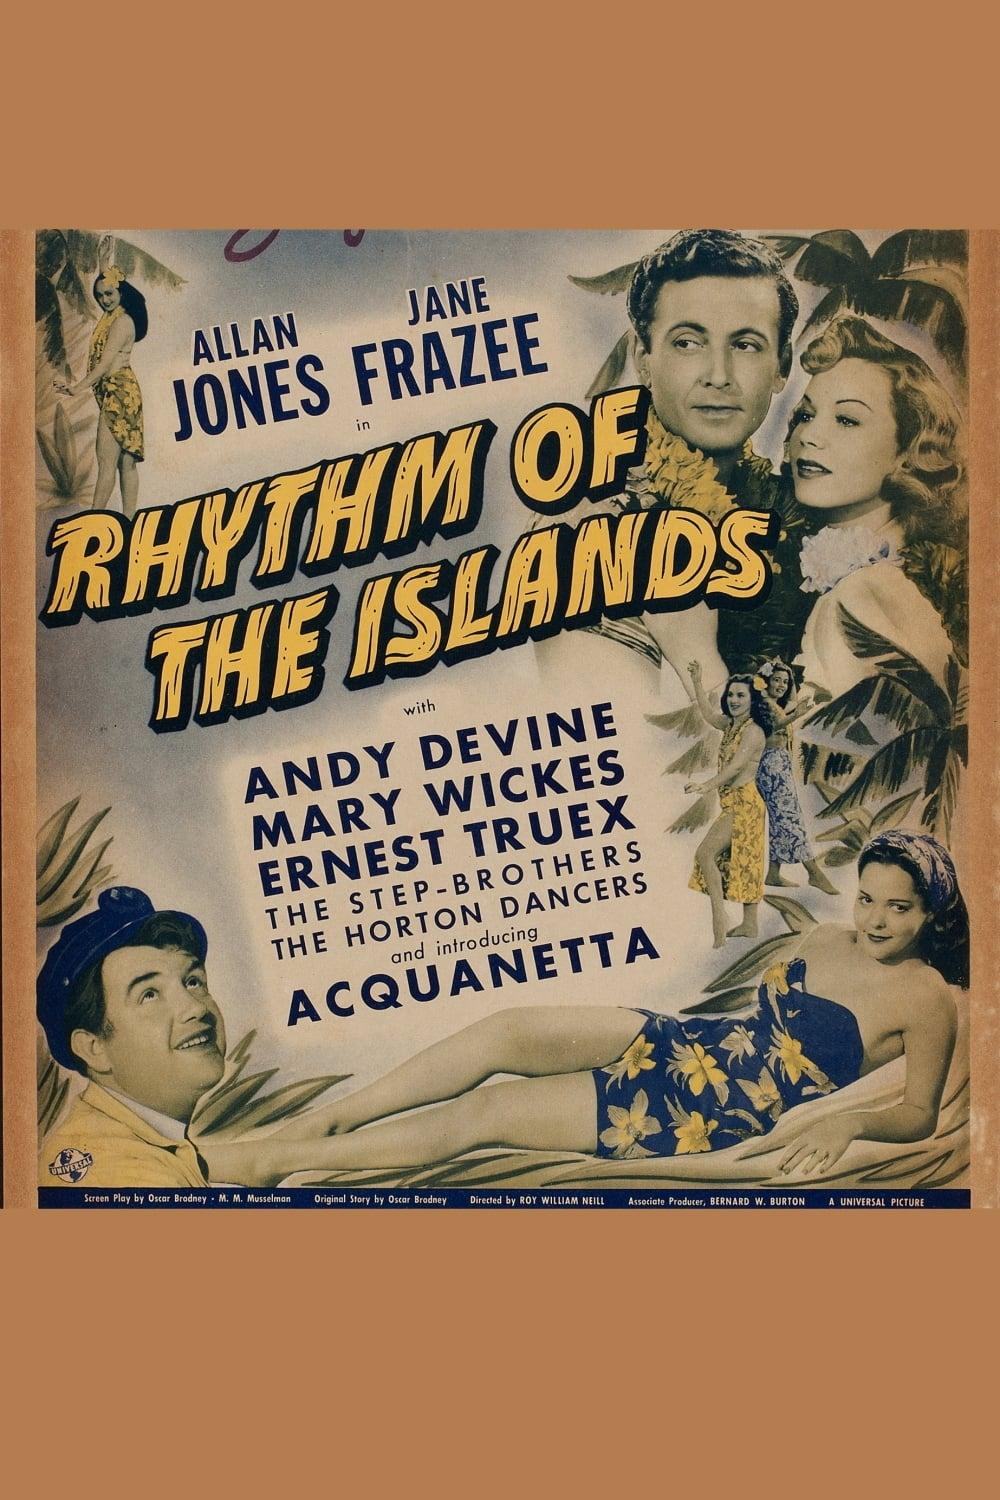 Rhythm of the Islands poster